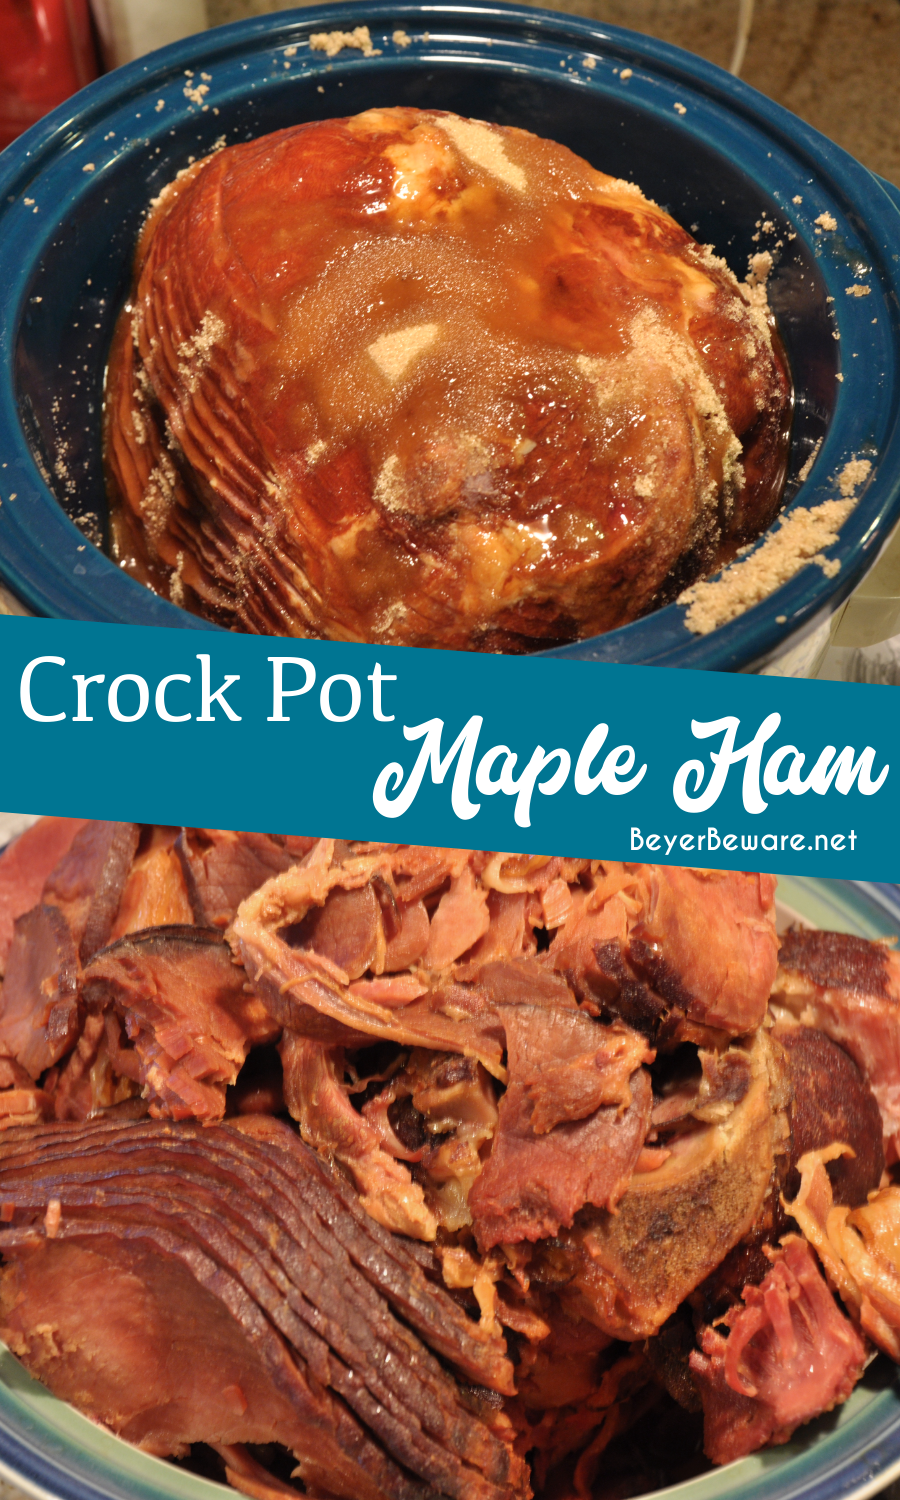 Crock Pot Maple Ham is slow cooked with brown sugar, maple syrup and pineapple juice for a juicy ham full of sweet maple flavor.